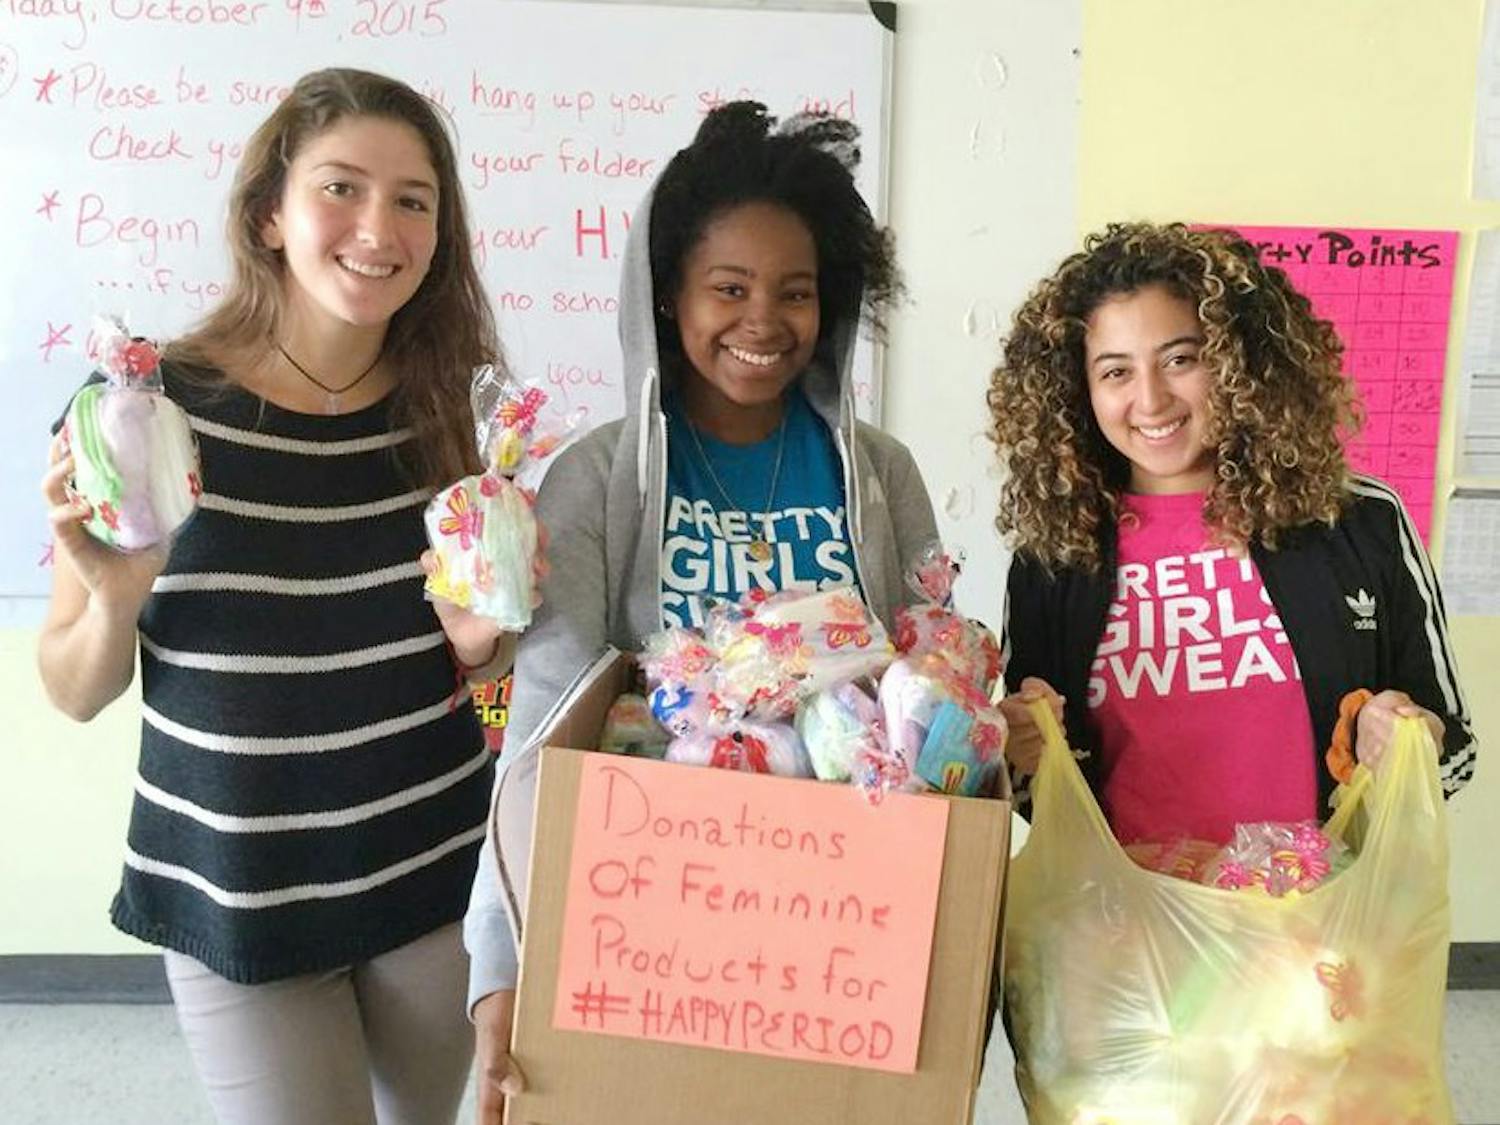 Kathryn McSpedon and other members of the #HappyPeriod cause contribute boxes of period supplies for homeless women around Buffalo.